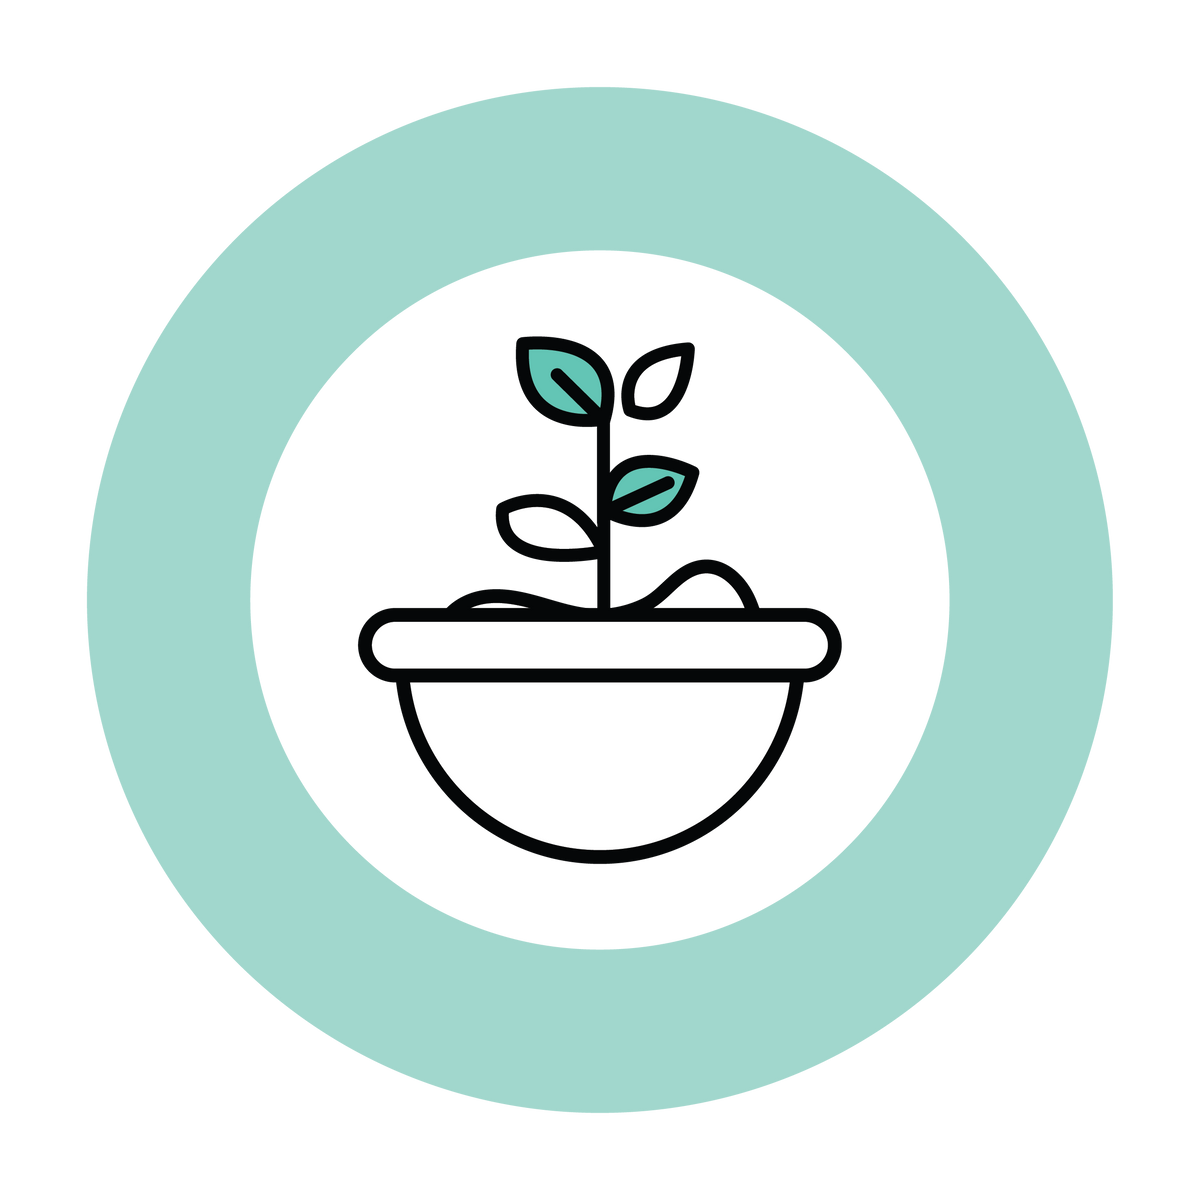 illustrated plant seedling growing in a pot surrounded by a teal circle